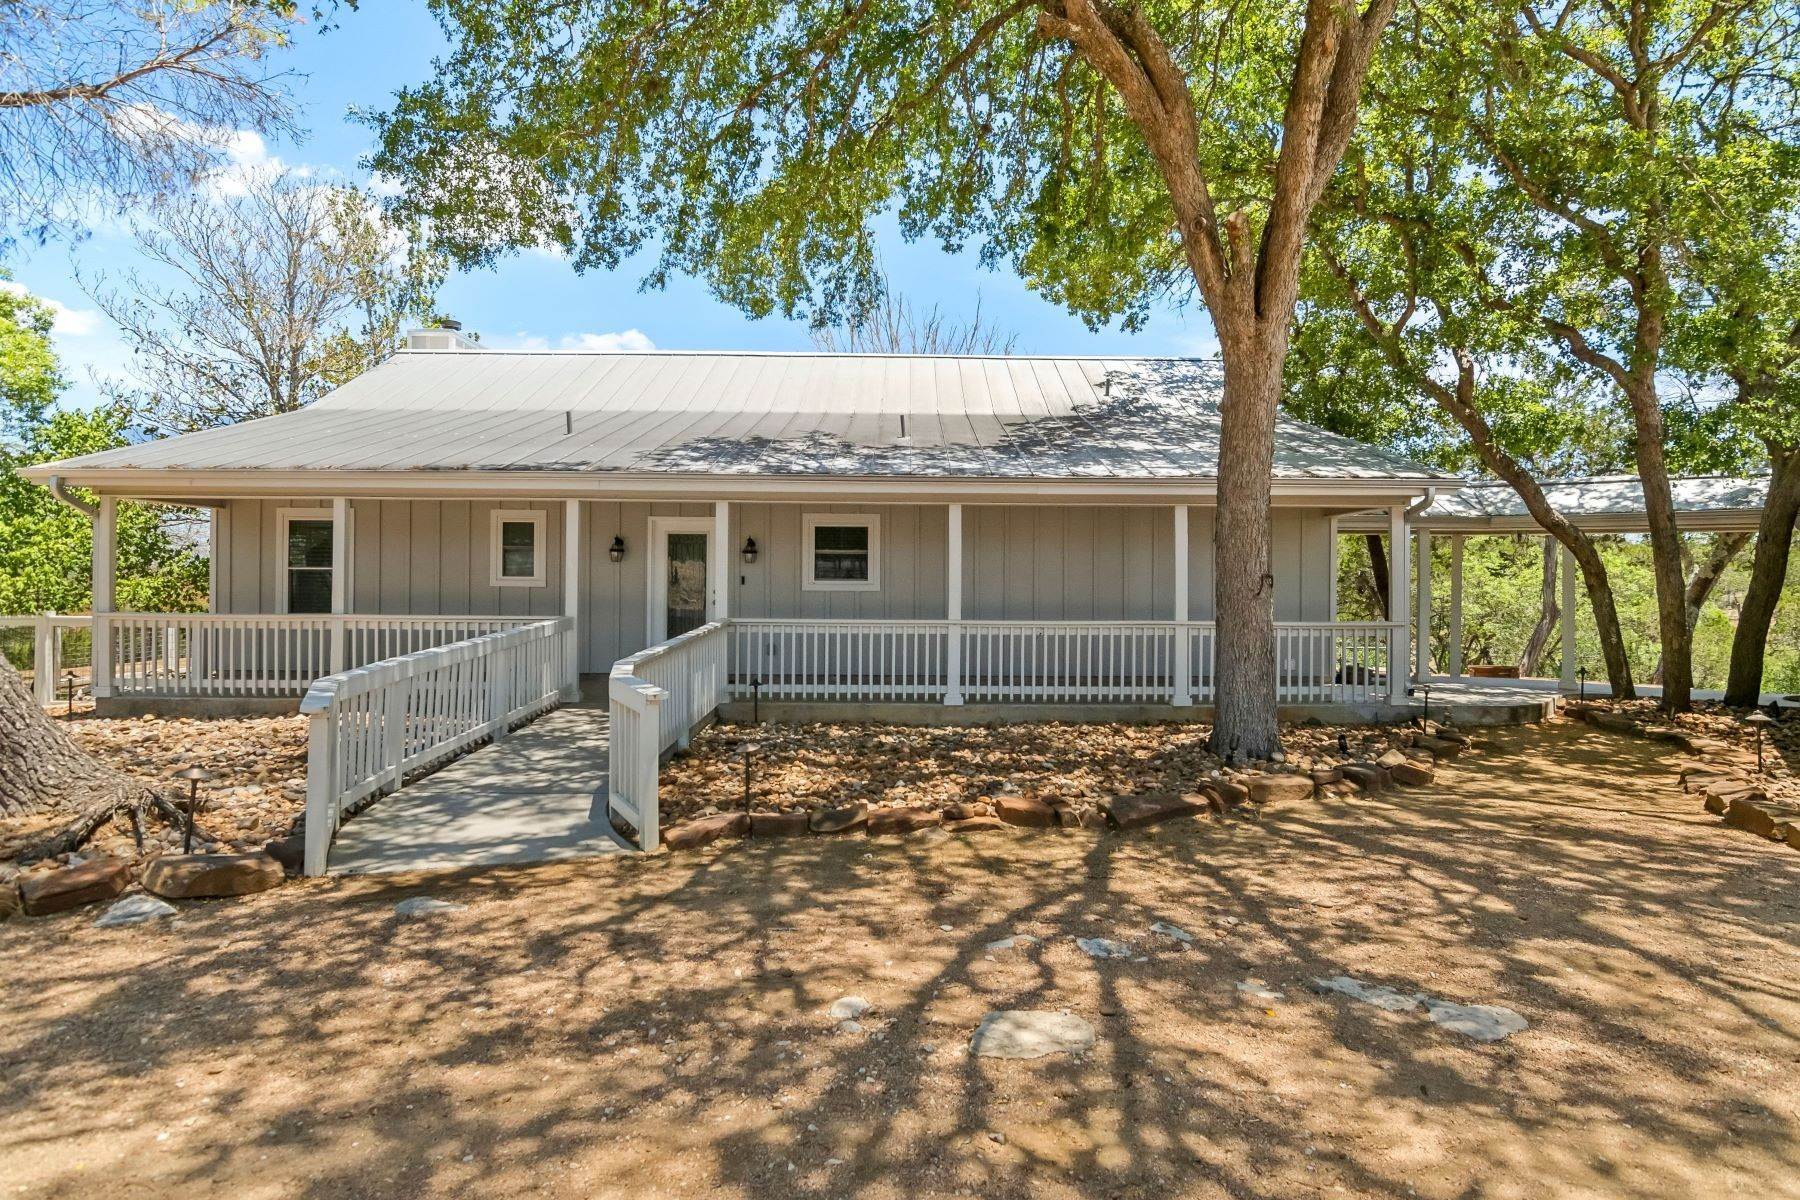 43. Farm and Ranch Properties at 227 Seewald Road Boerne, Texas 78006 United States